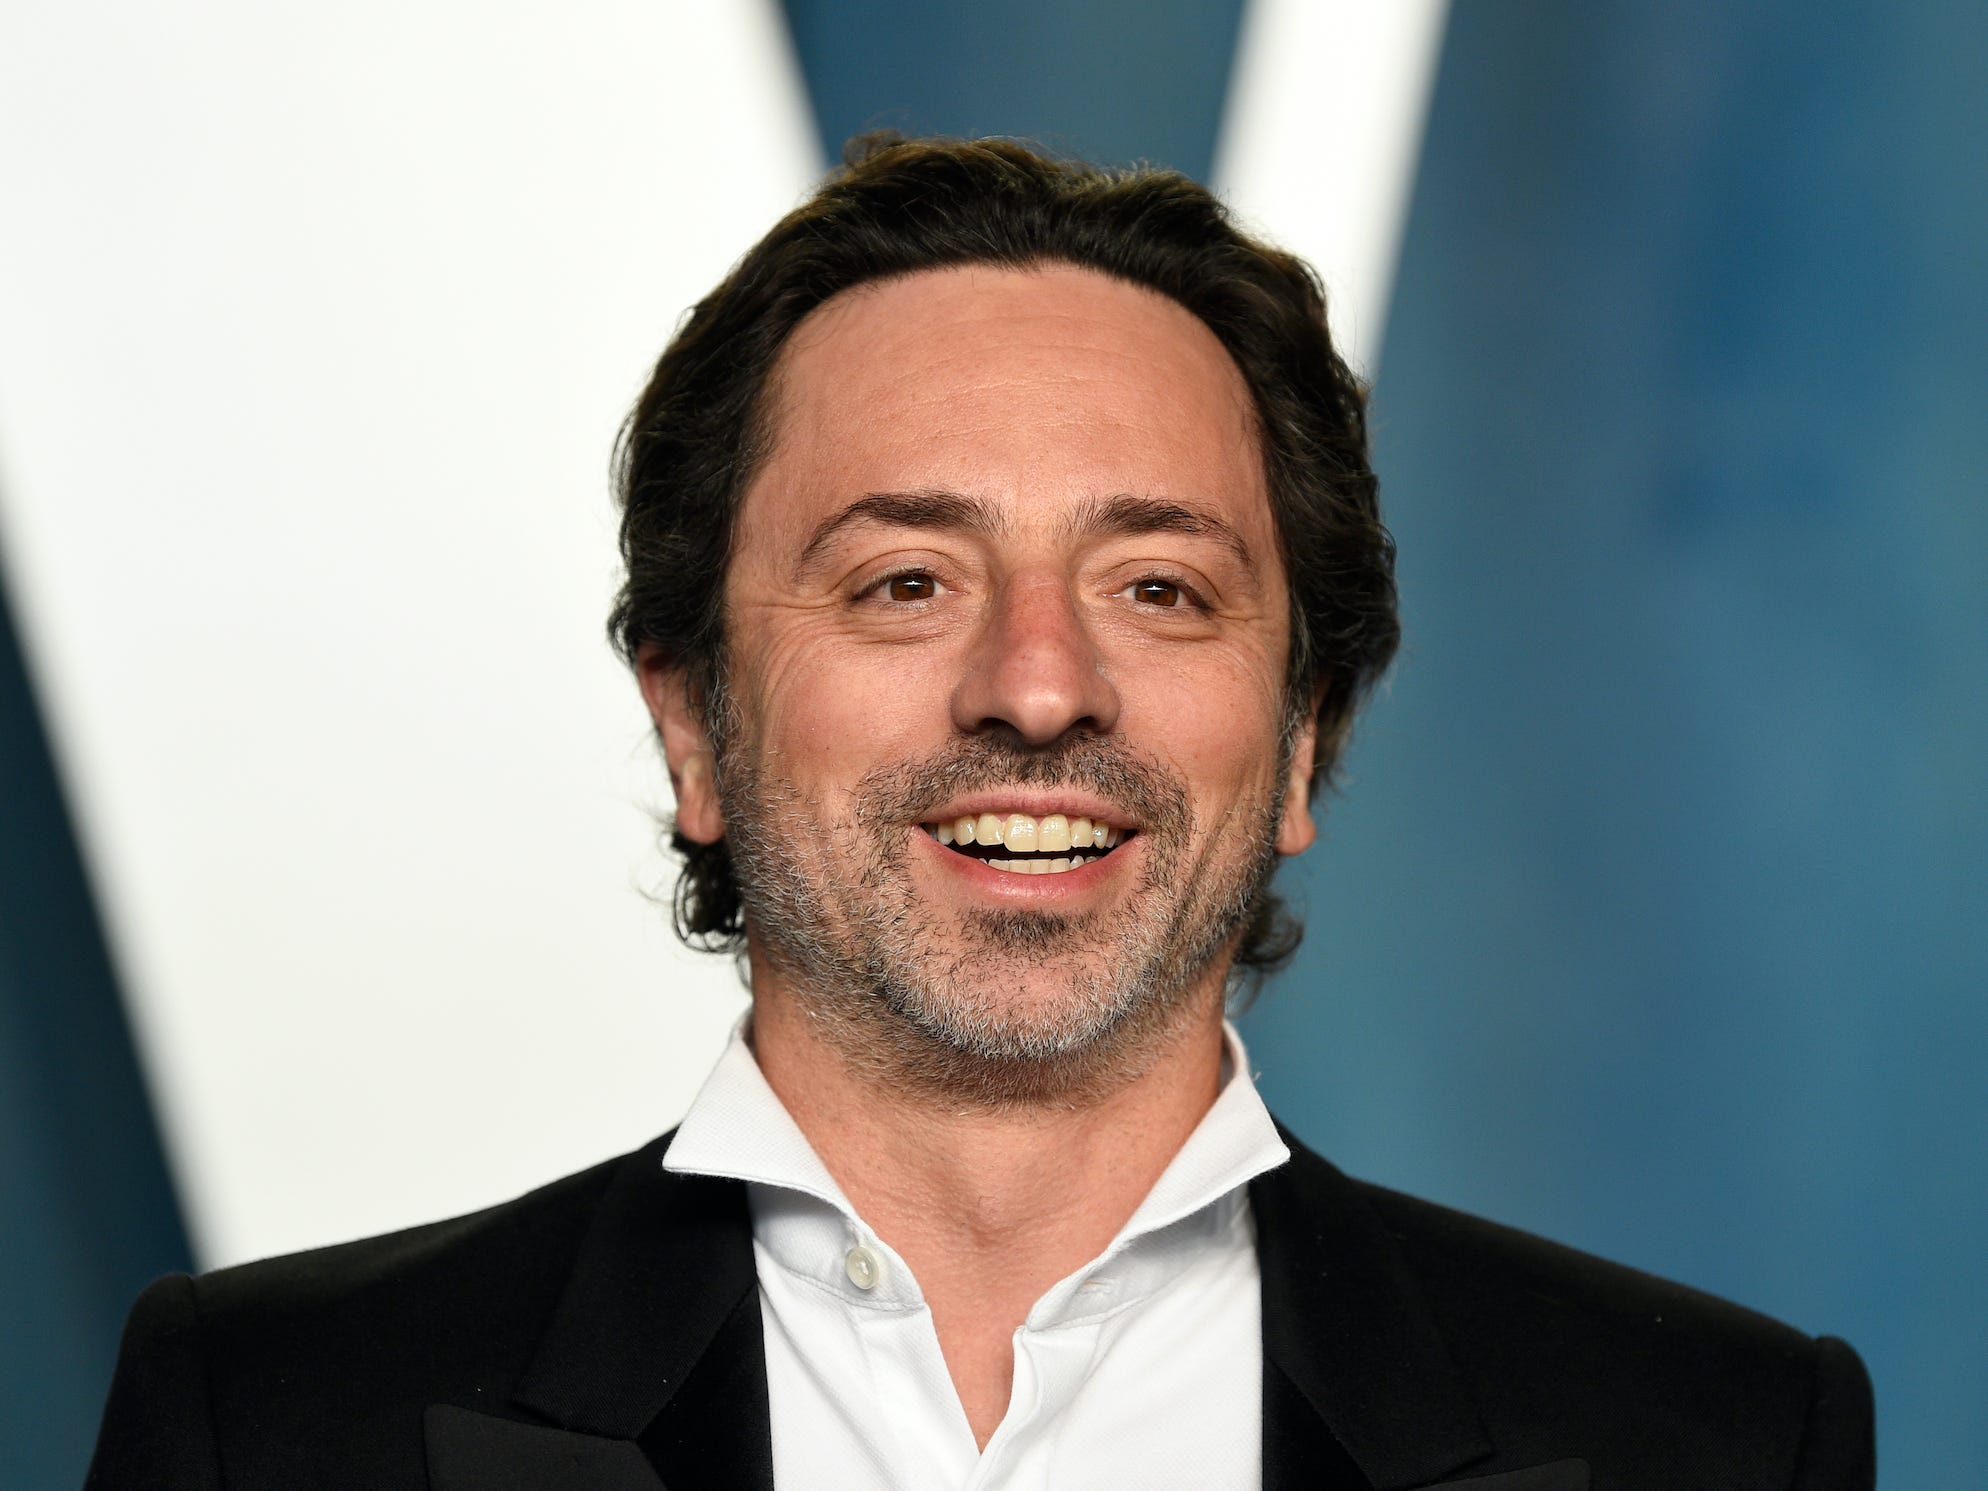 Close up of Sergey Brin smiling on red carpet after Oscars ceremony